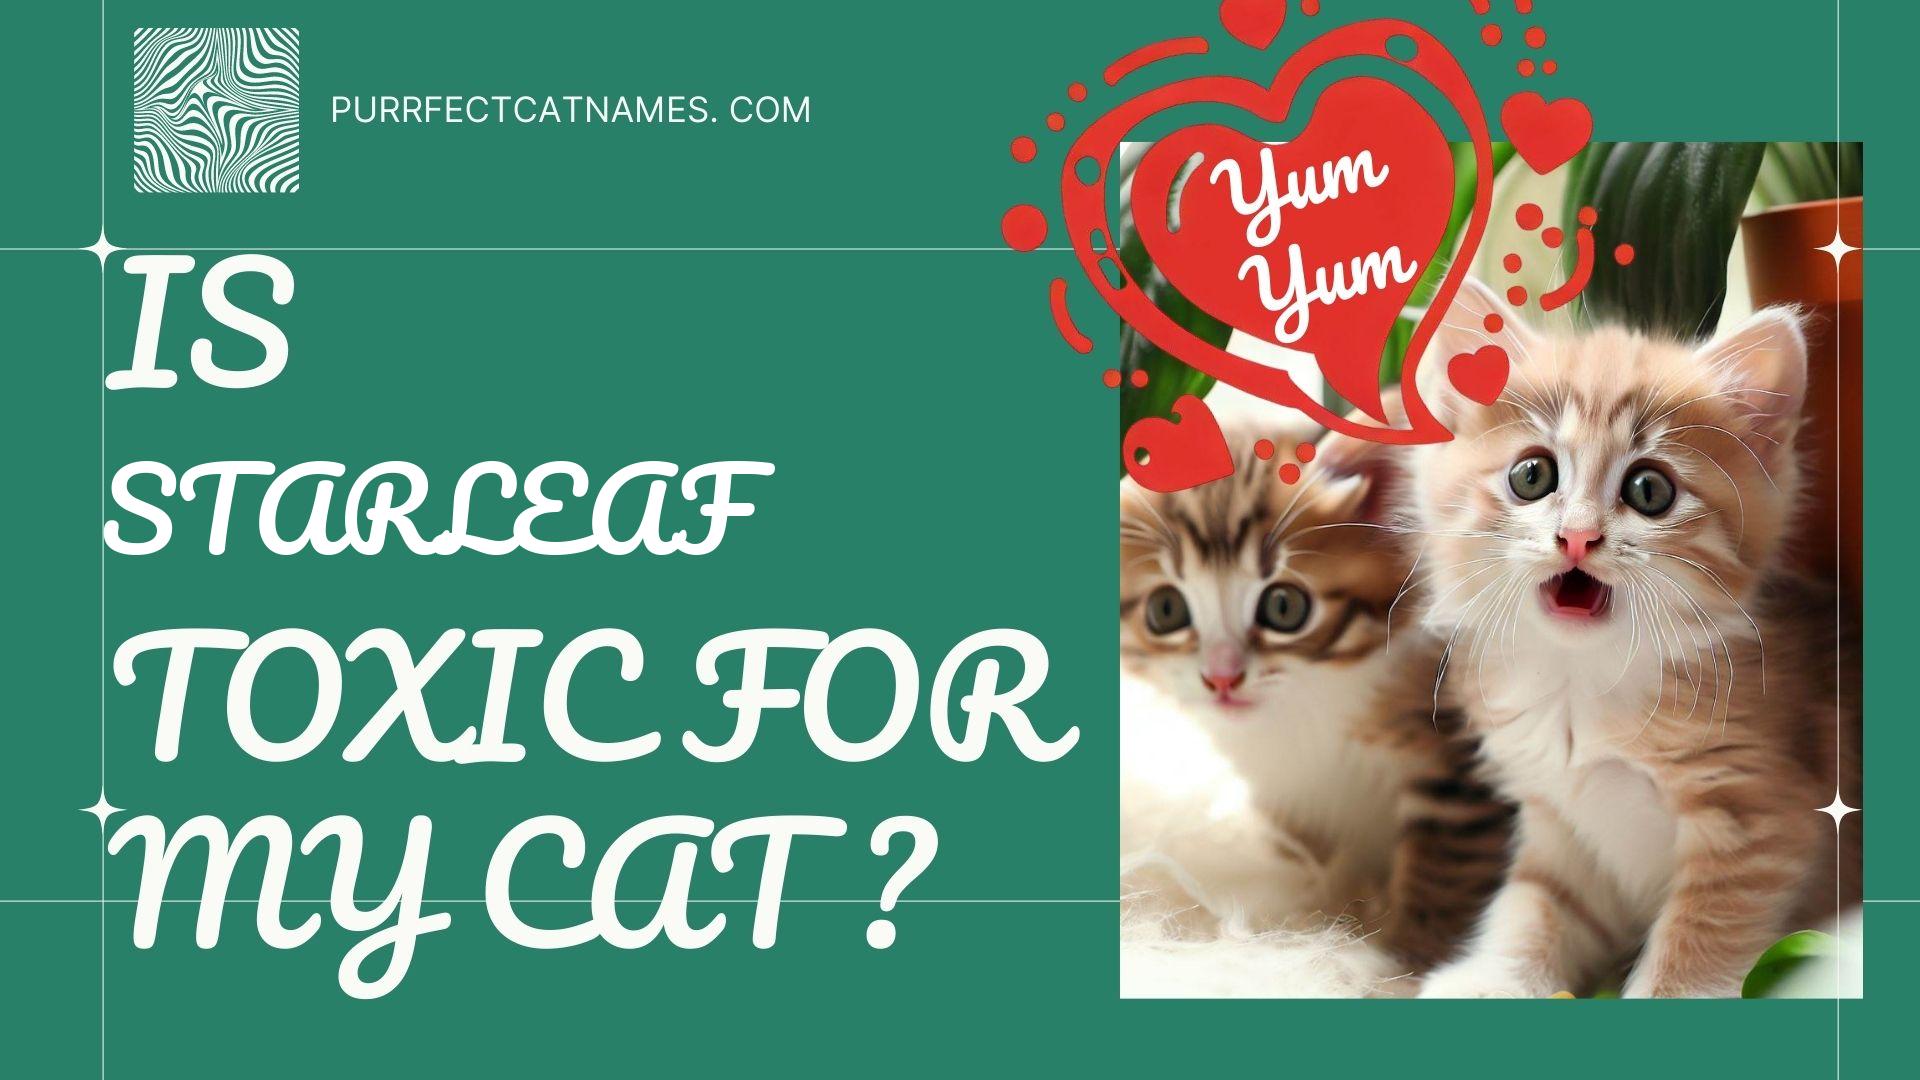 IsStarleaf plant toxic for your cat